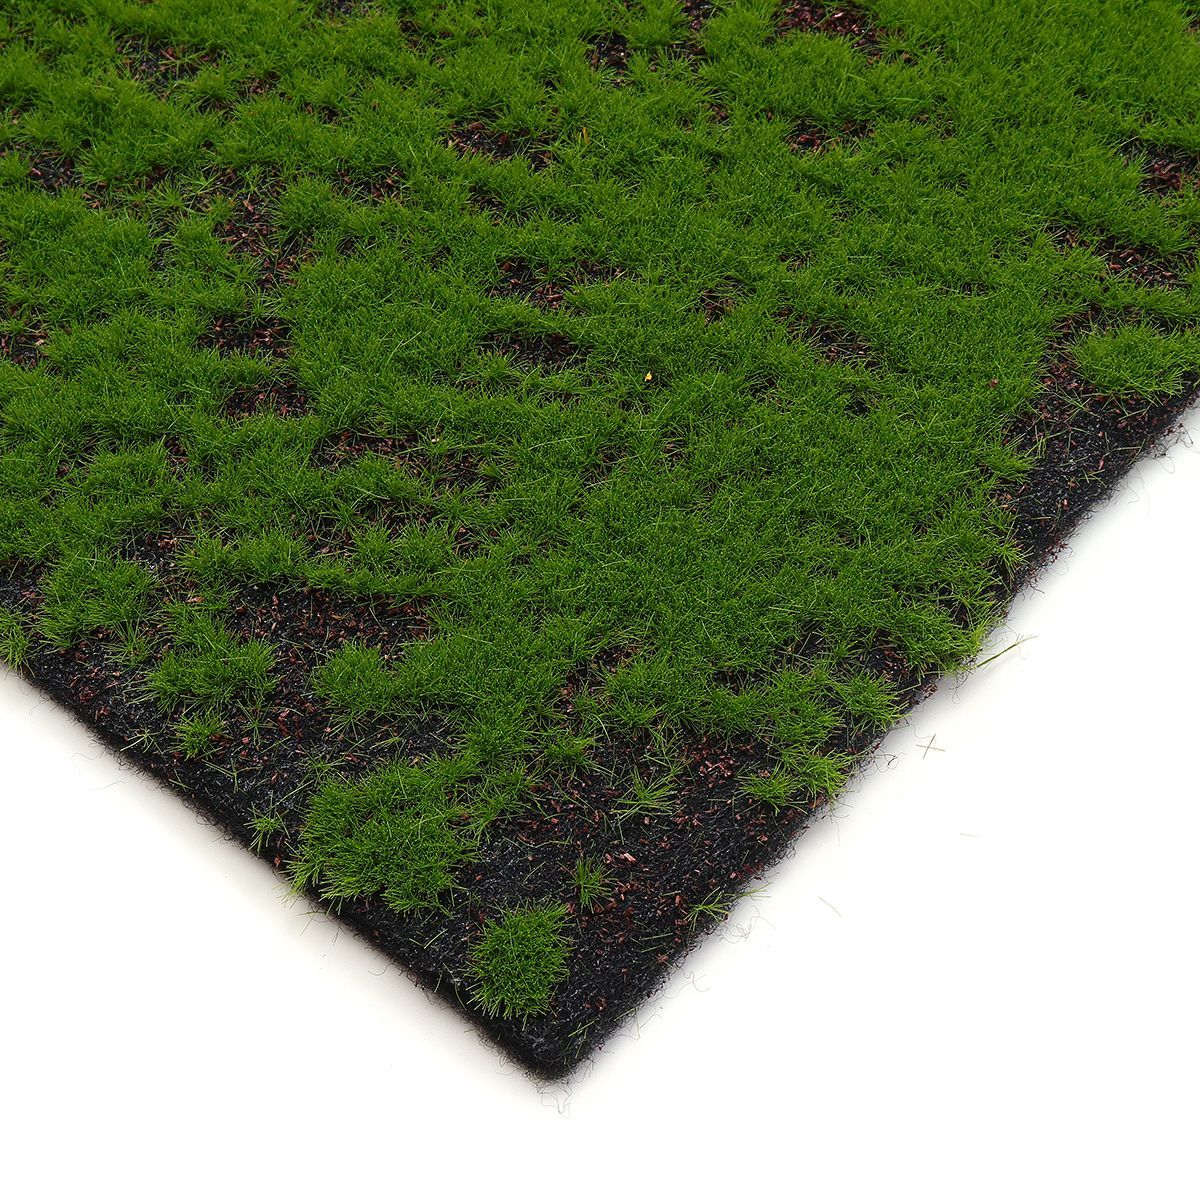 11m-Micro-Landscape-Hang-Wall-Artificial-Moss-Grass-Plant-Lawn-Home-Decorations-1457319